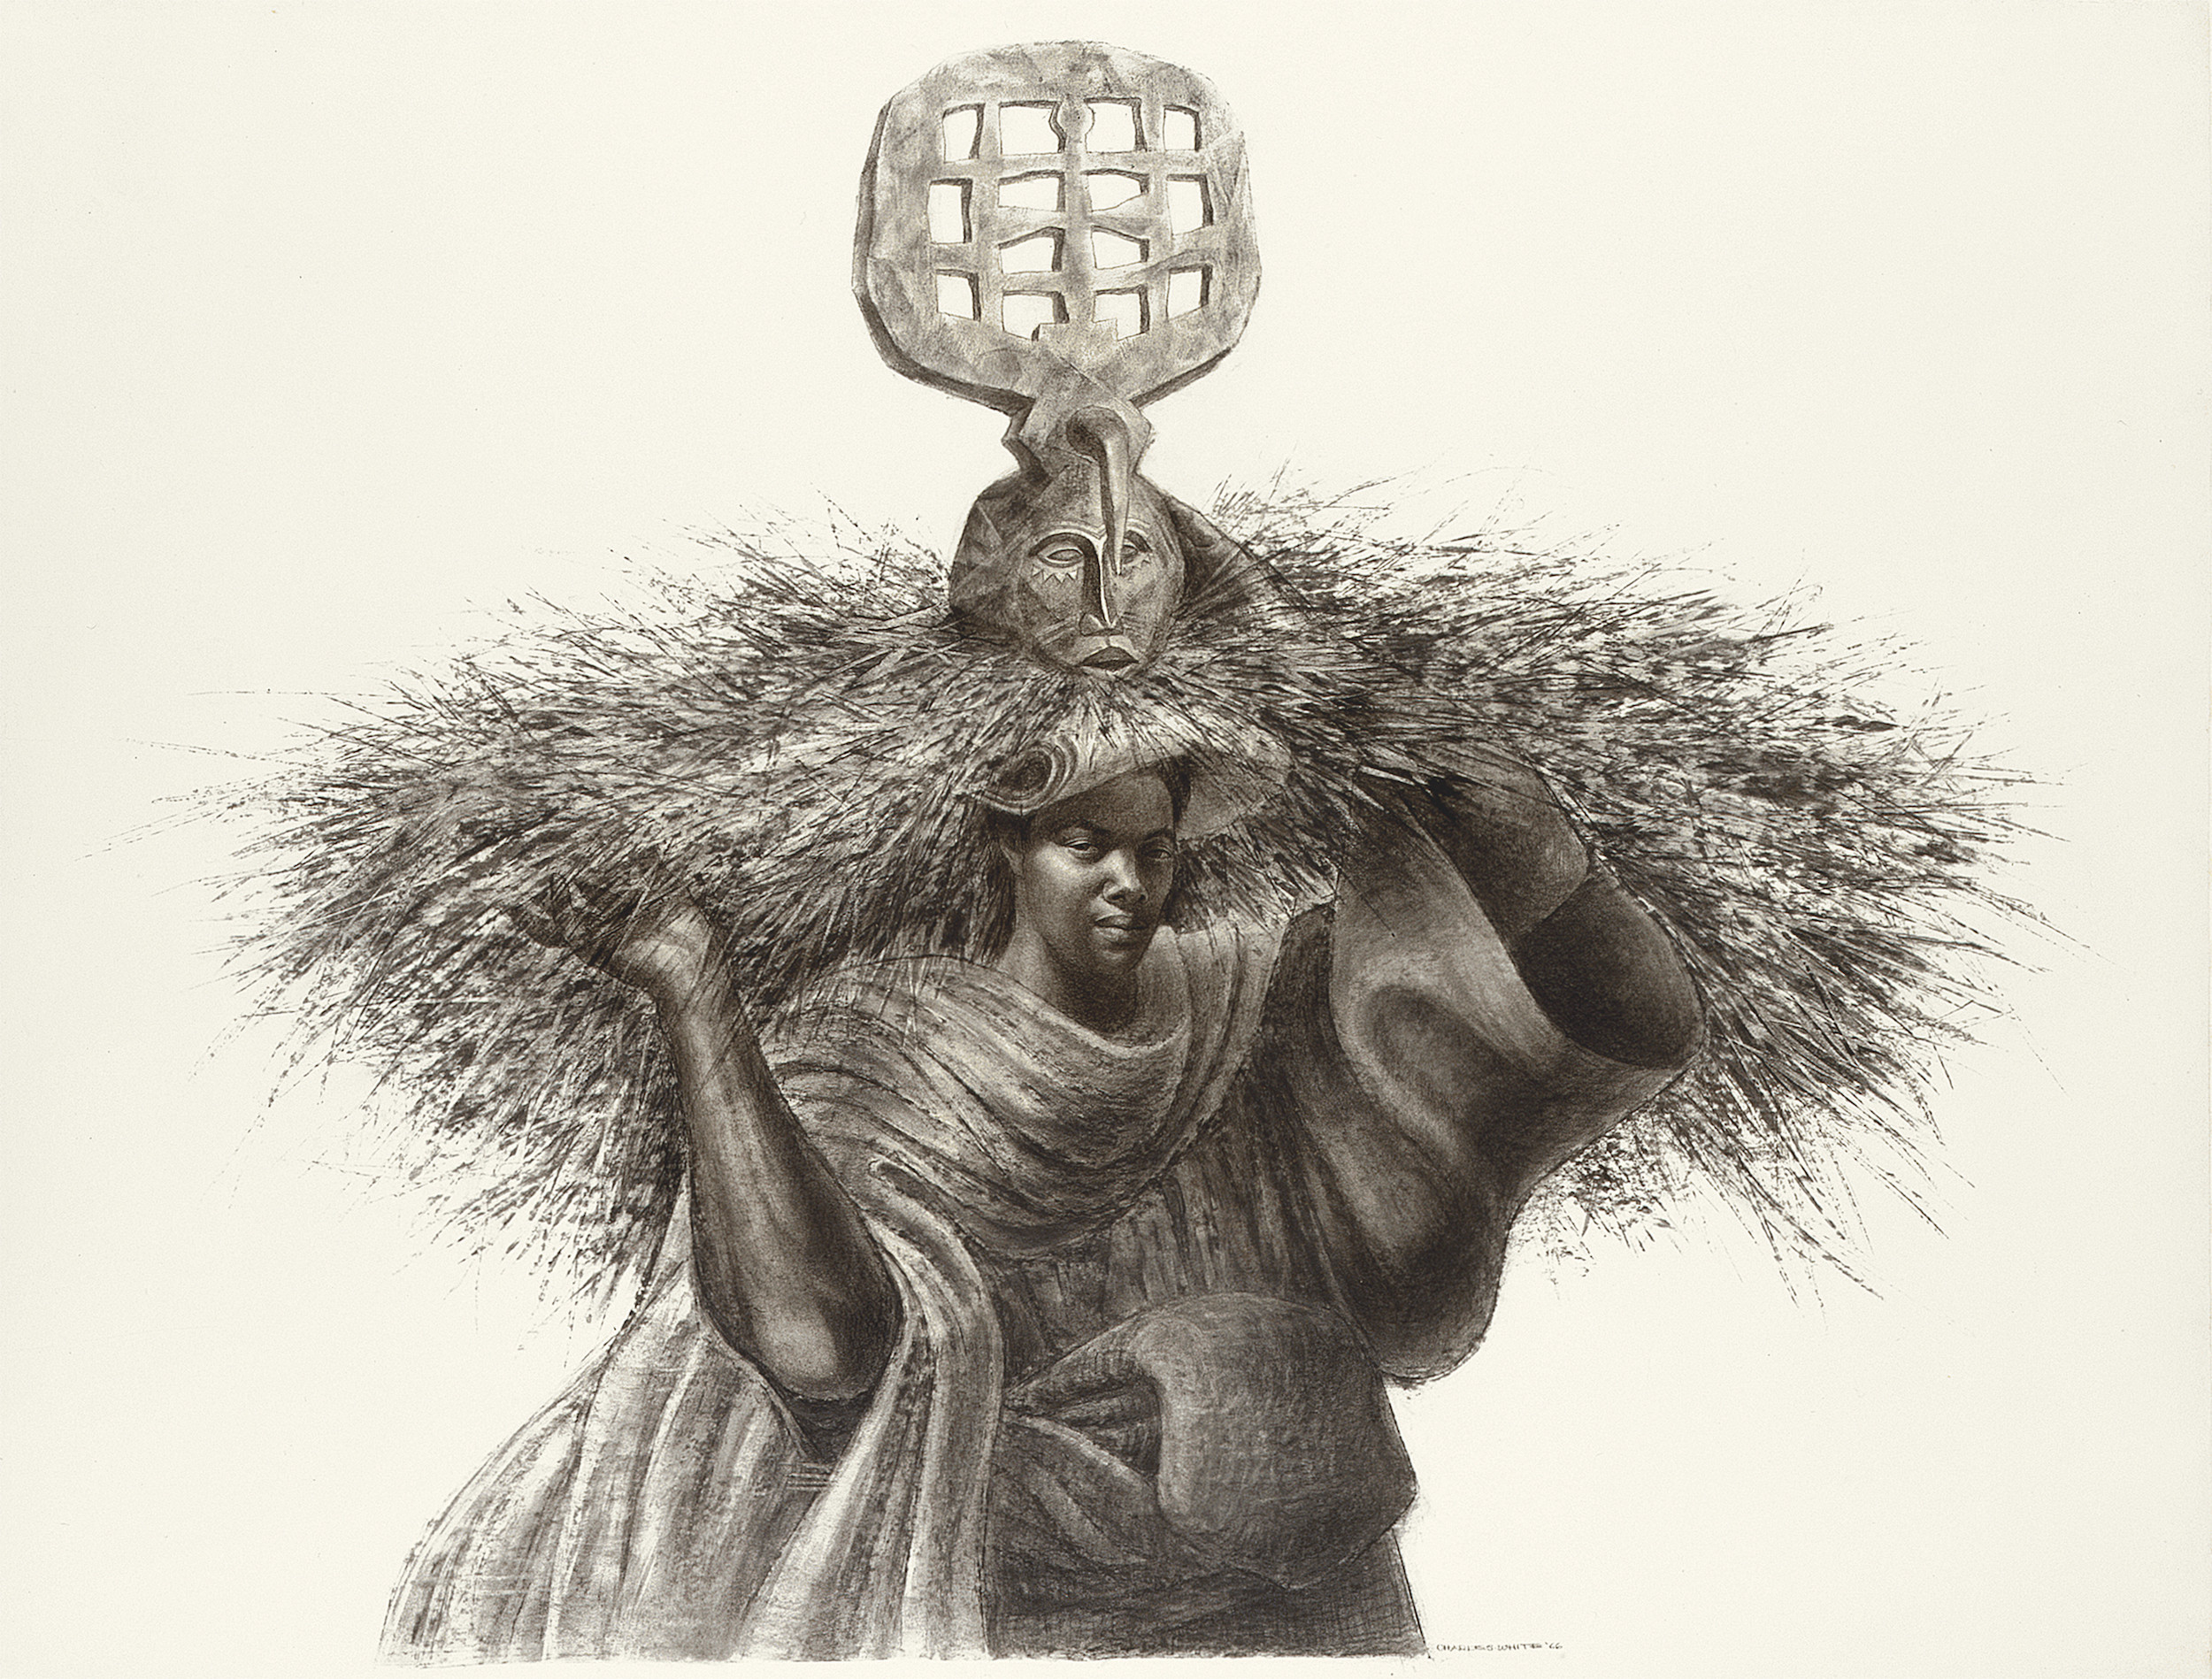 Charles White (American, 1918-1979). J’Accuse #7. 1966. Charcoal on paper, 39 1/4 × 51 1/2″ (99.7 × 130.8 cm). Private collection. © The Charles White Archives/ Photo courtesy of Michael Rosenfeld Gallery LLC, New York, NY